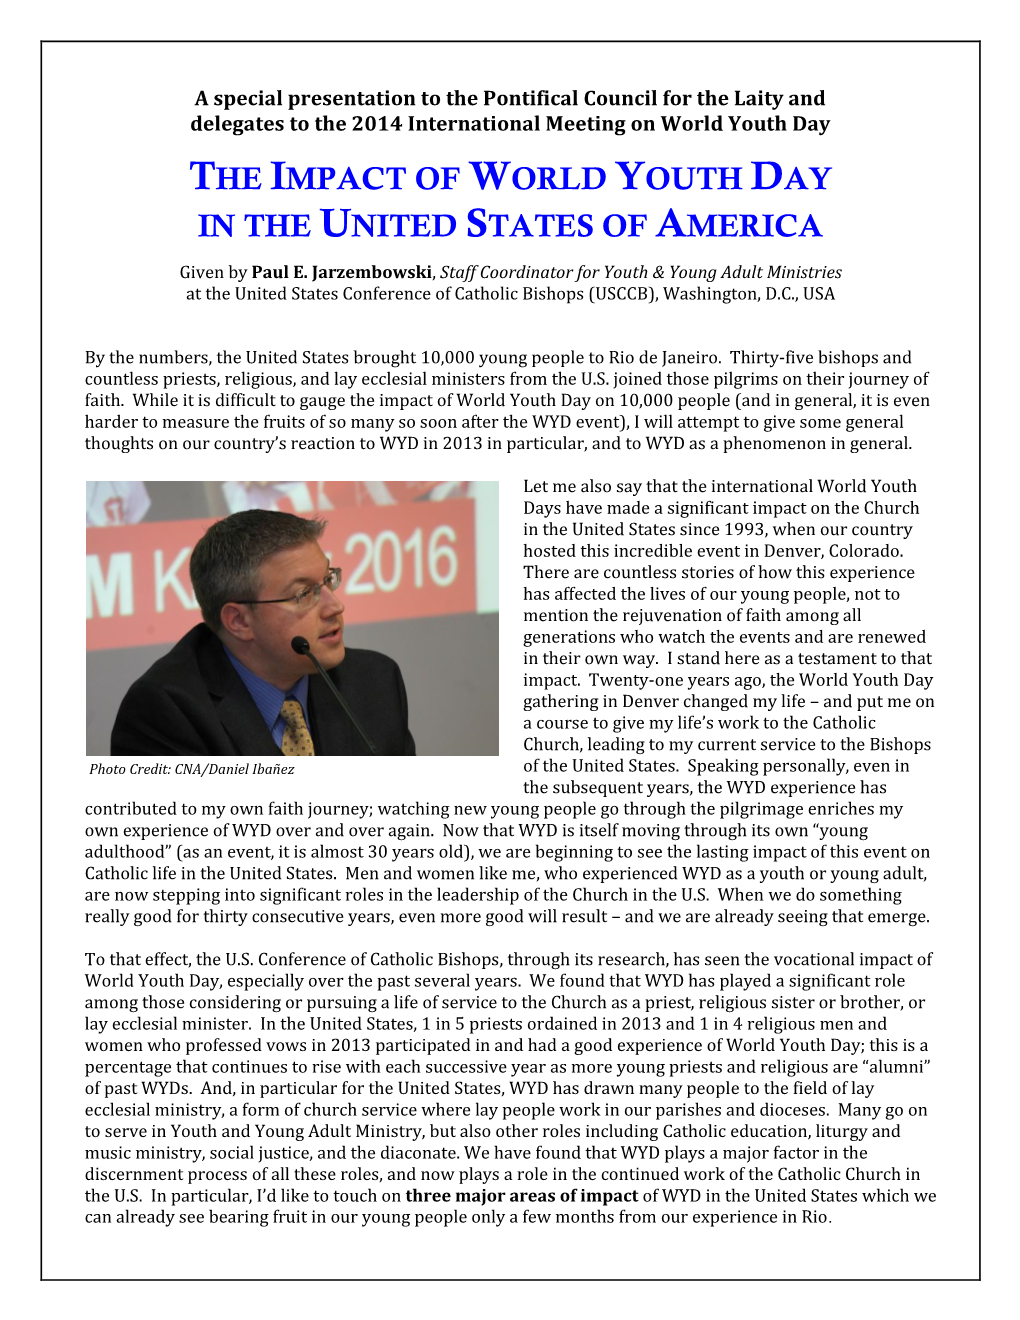 The Impact of World Youth Day in the United States of America